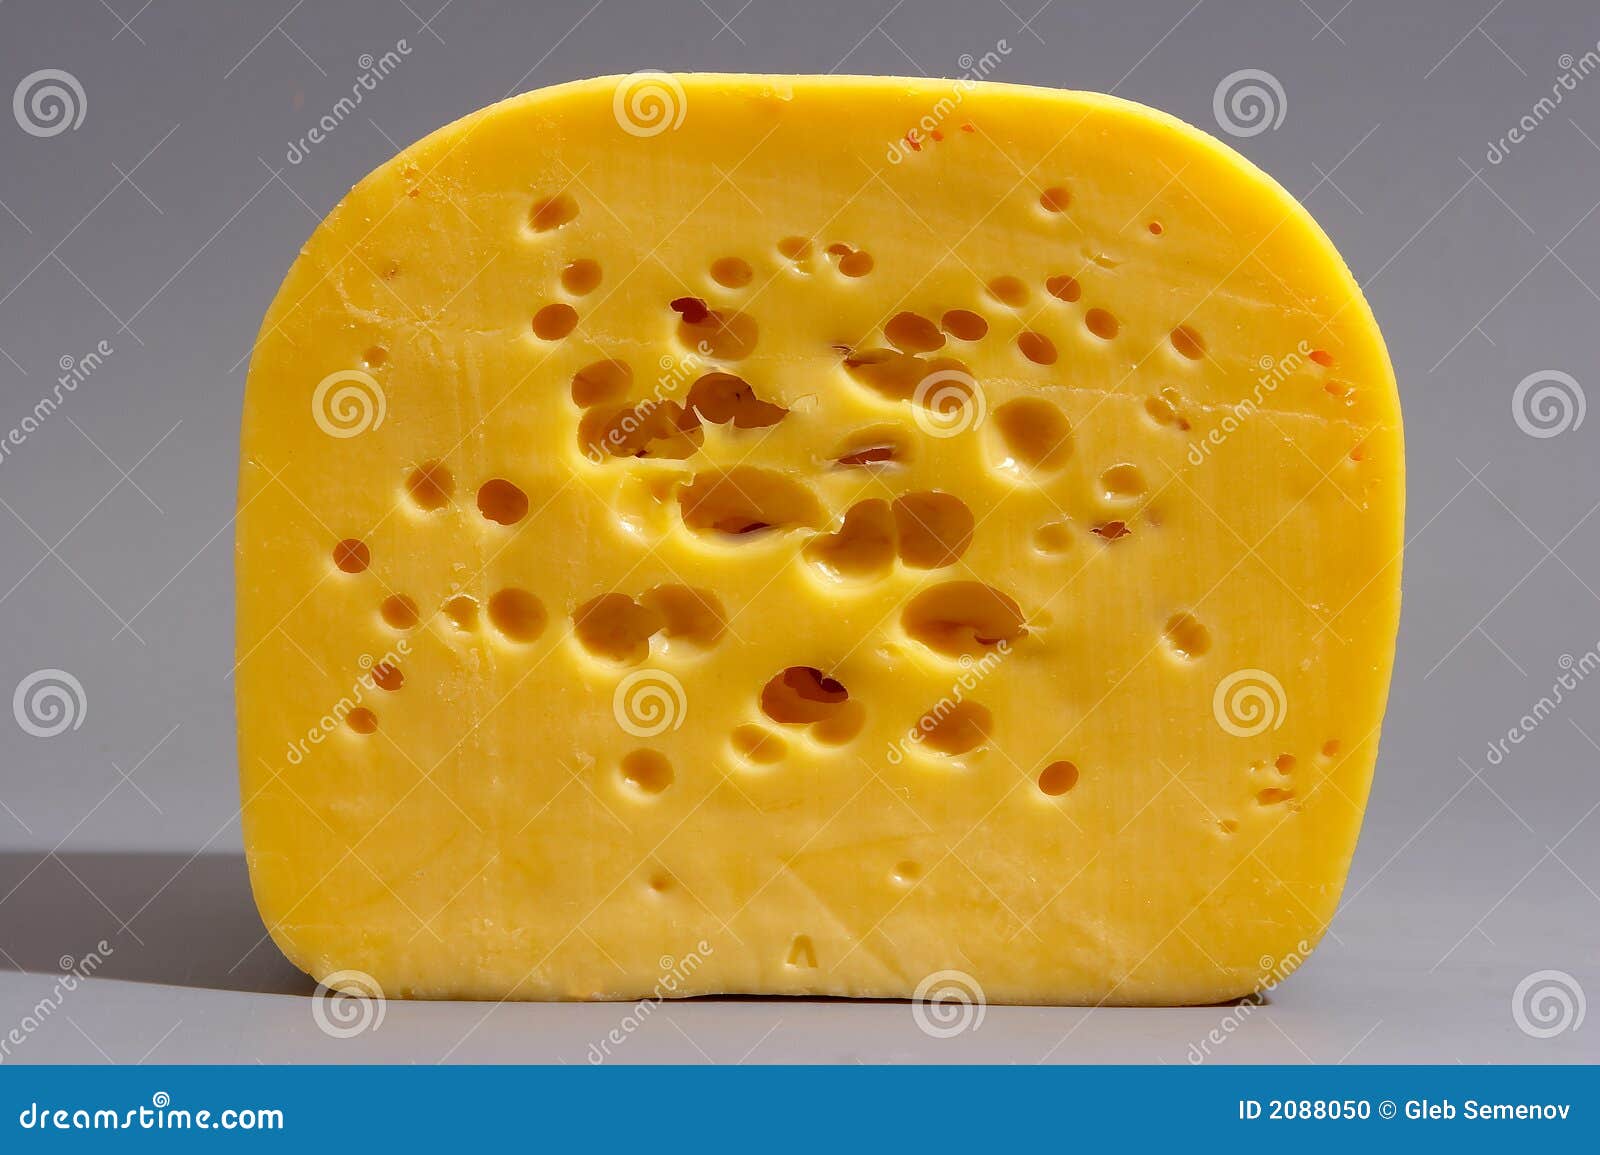 Cut of cheese stock photo. Image of cheeseboard, products - 2088050